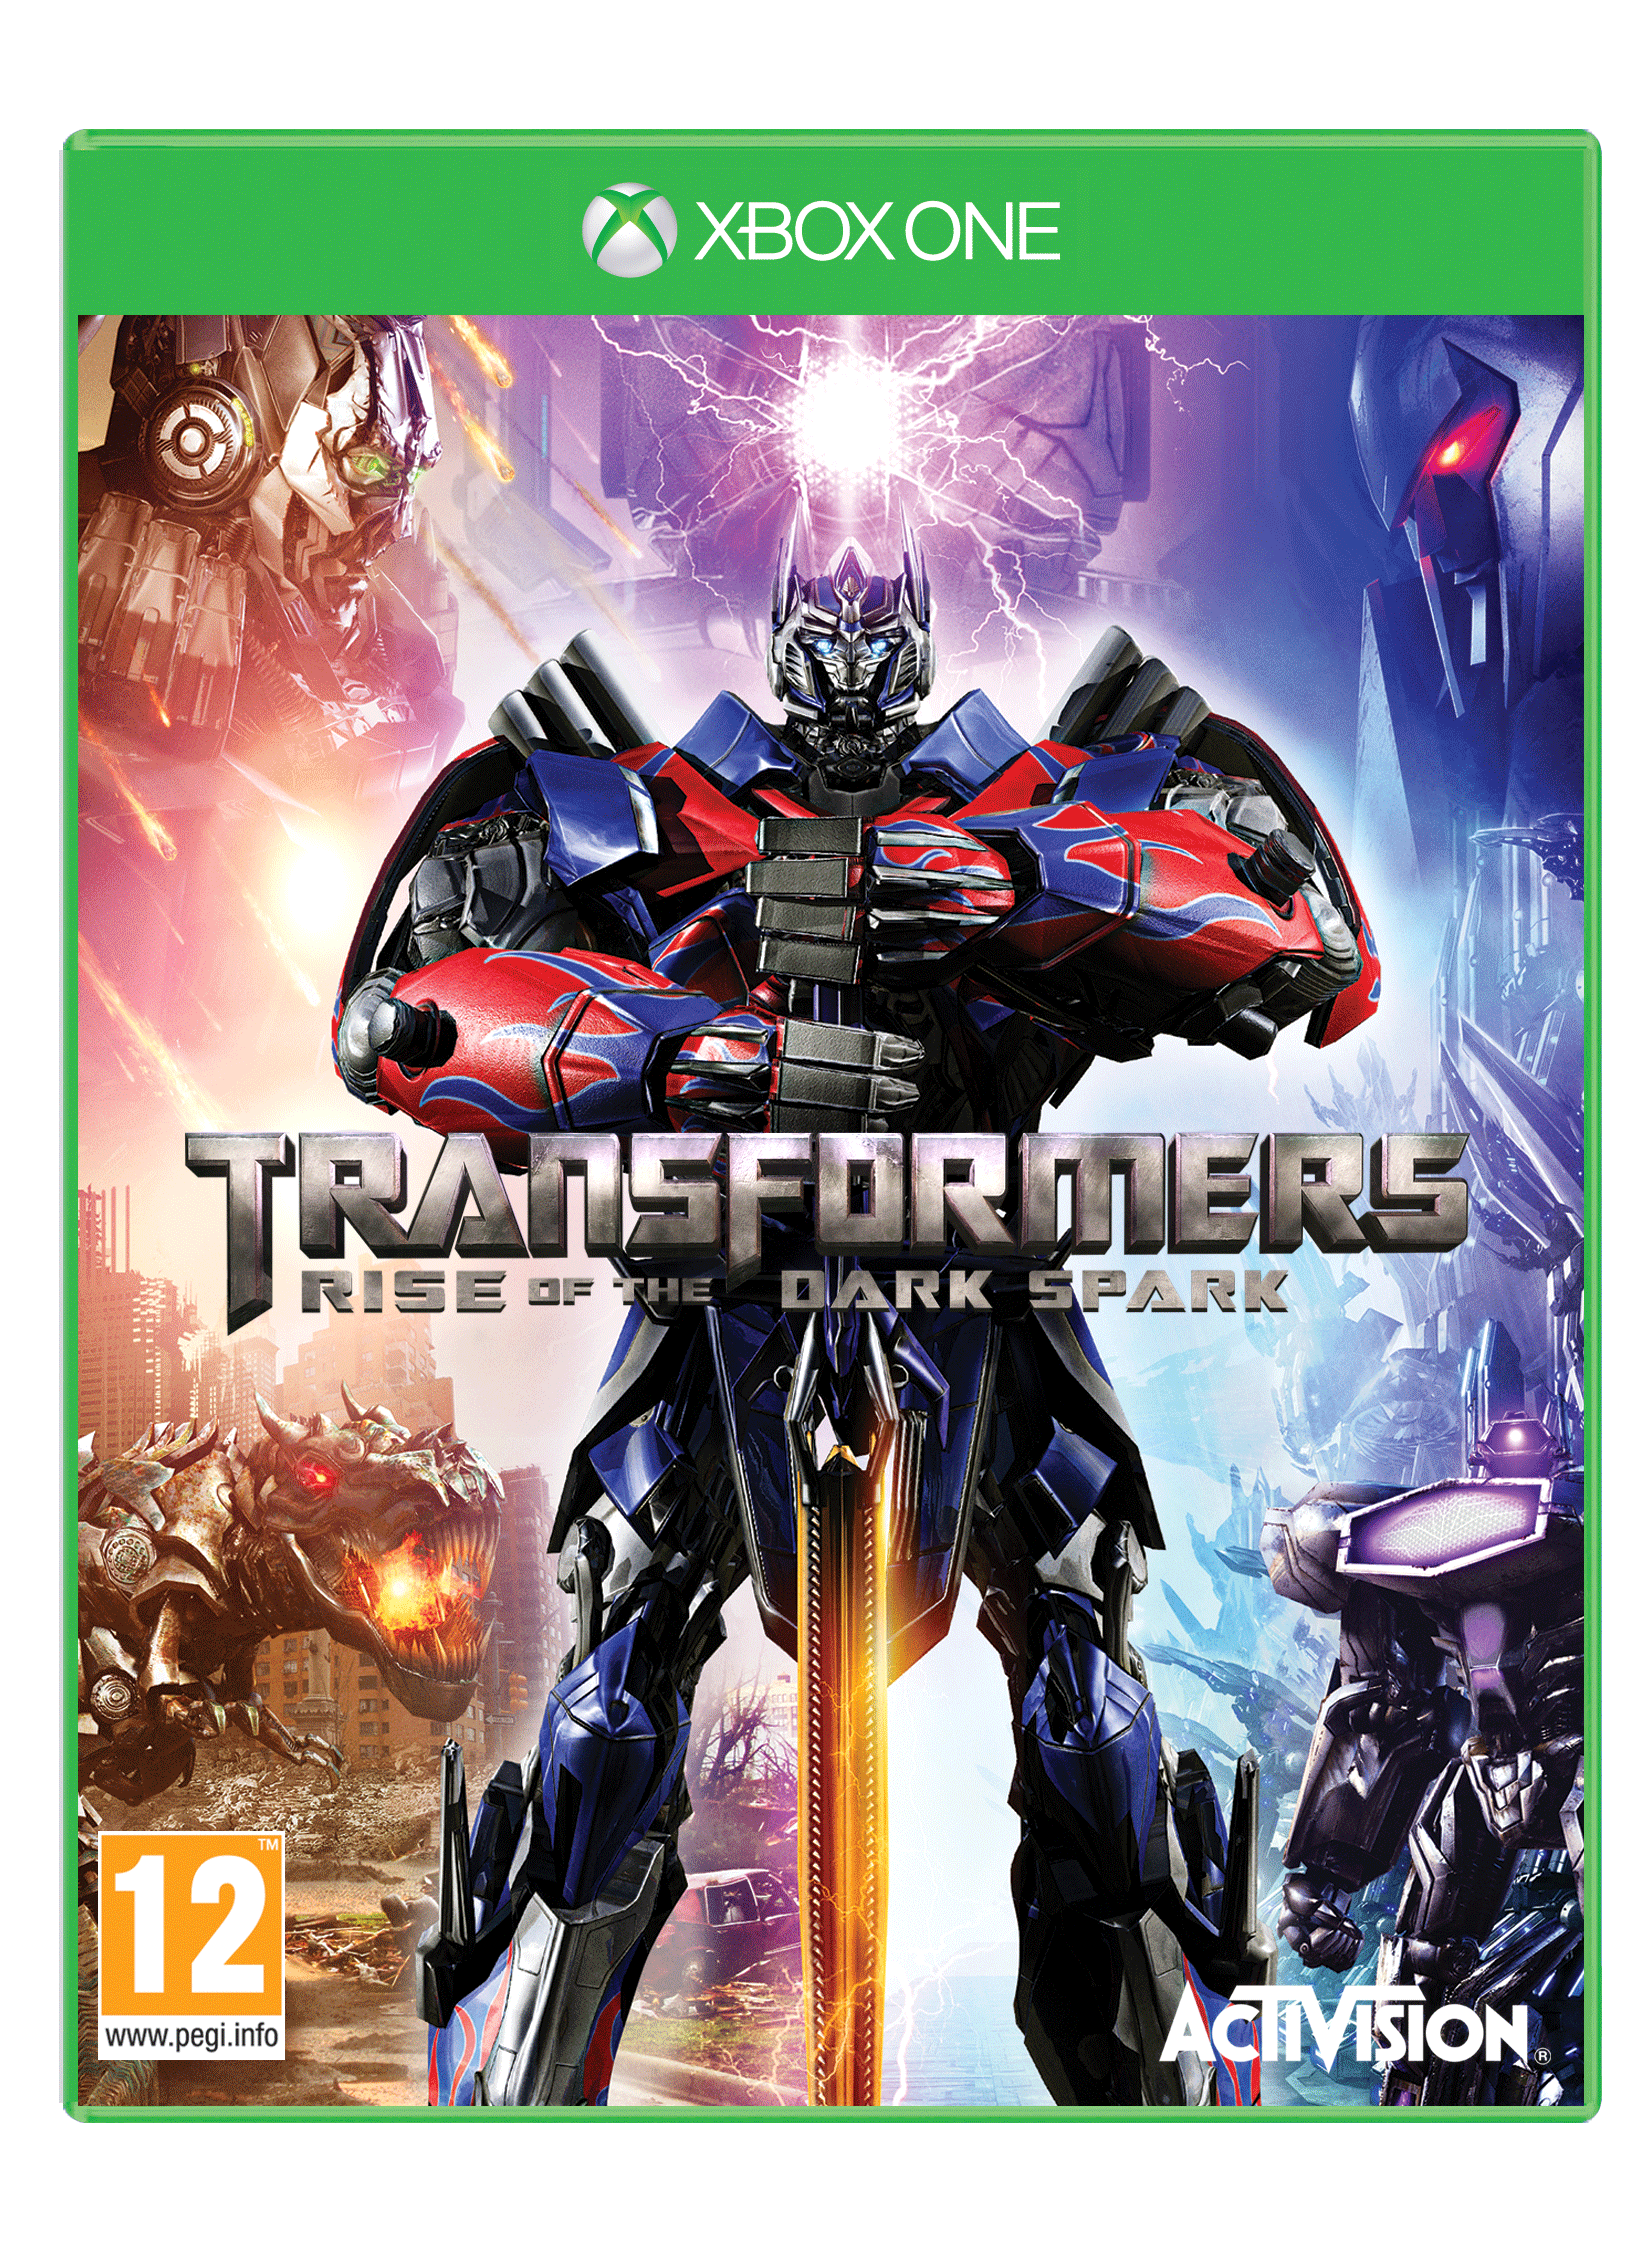 Transformers: Rise of the Dark Spark (Xbox One), Activision